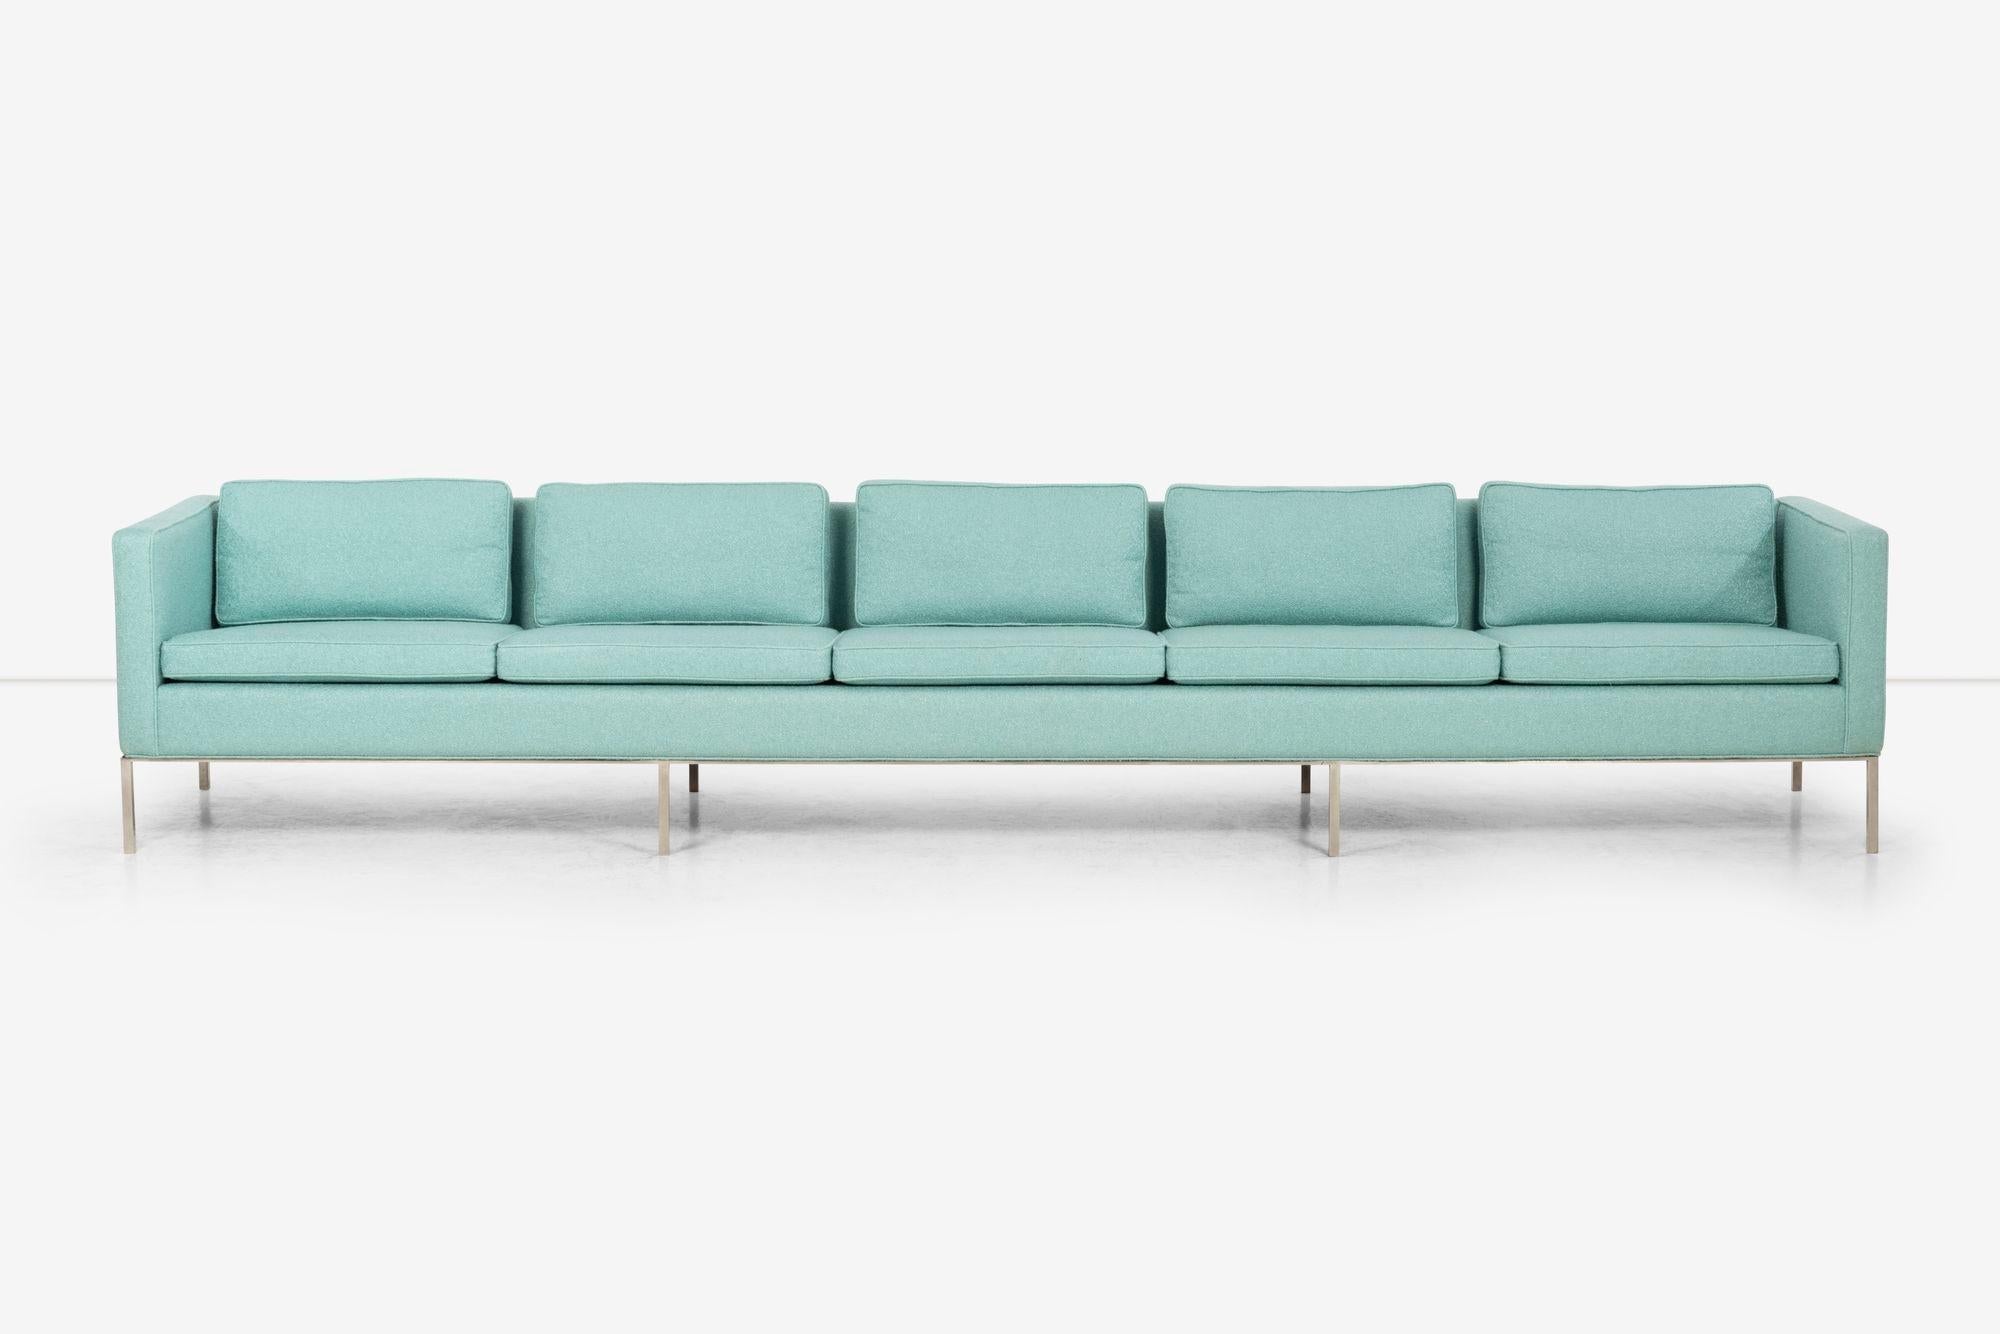 Appliqué William Armbruster Custom Monumental five-seat Sofa for Chase Manhattan For Sale